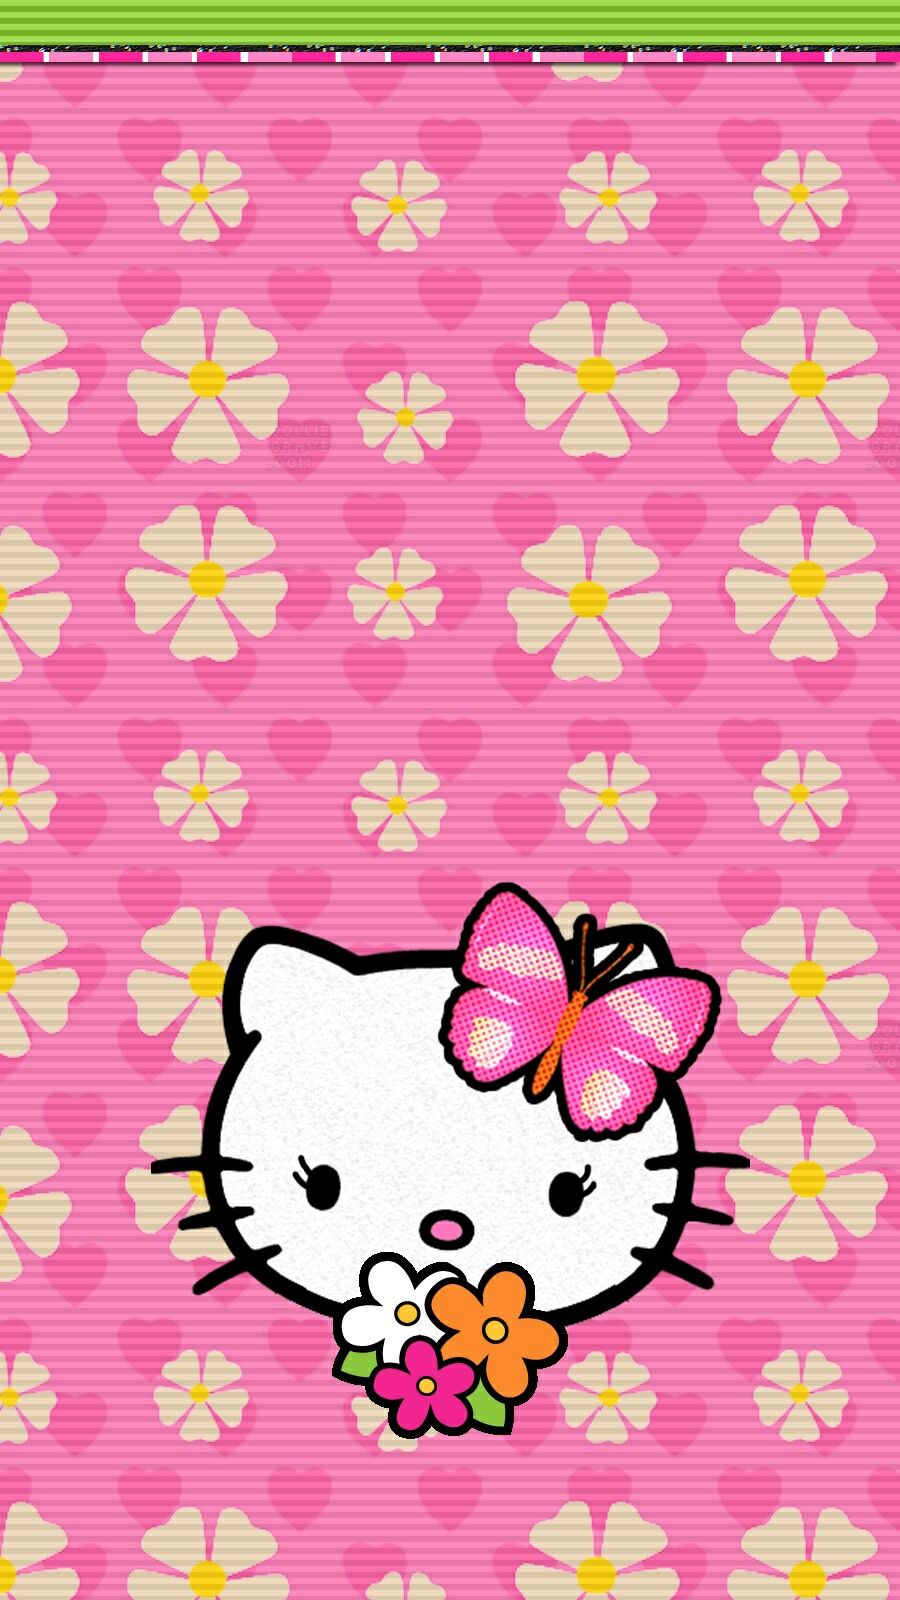 Hk spring wallpaper iphone. Hello kitty iphone wallpaper, Hello kitty wallpaper, Kitty wallpaper